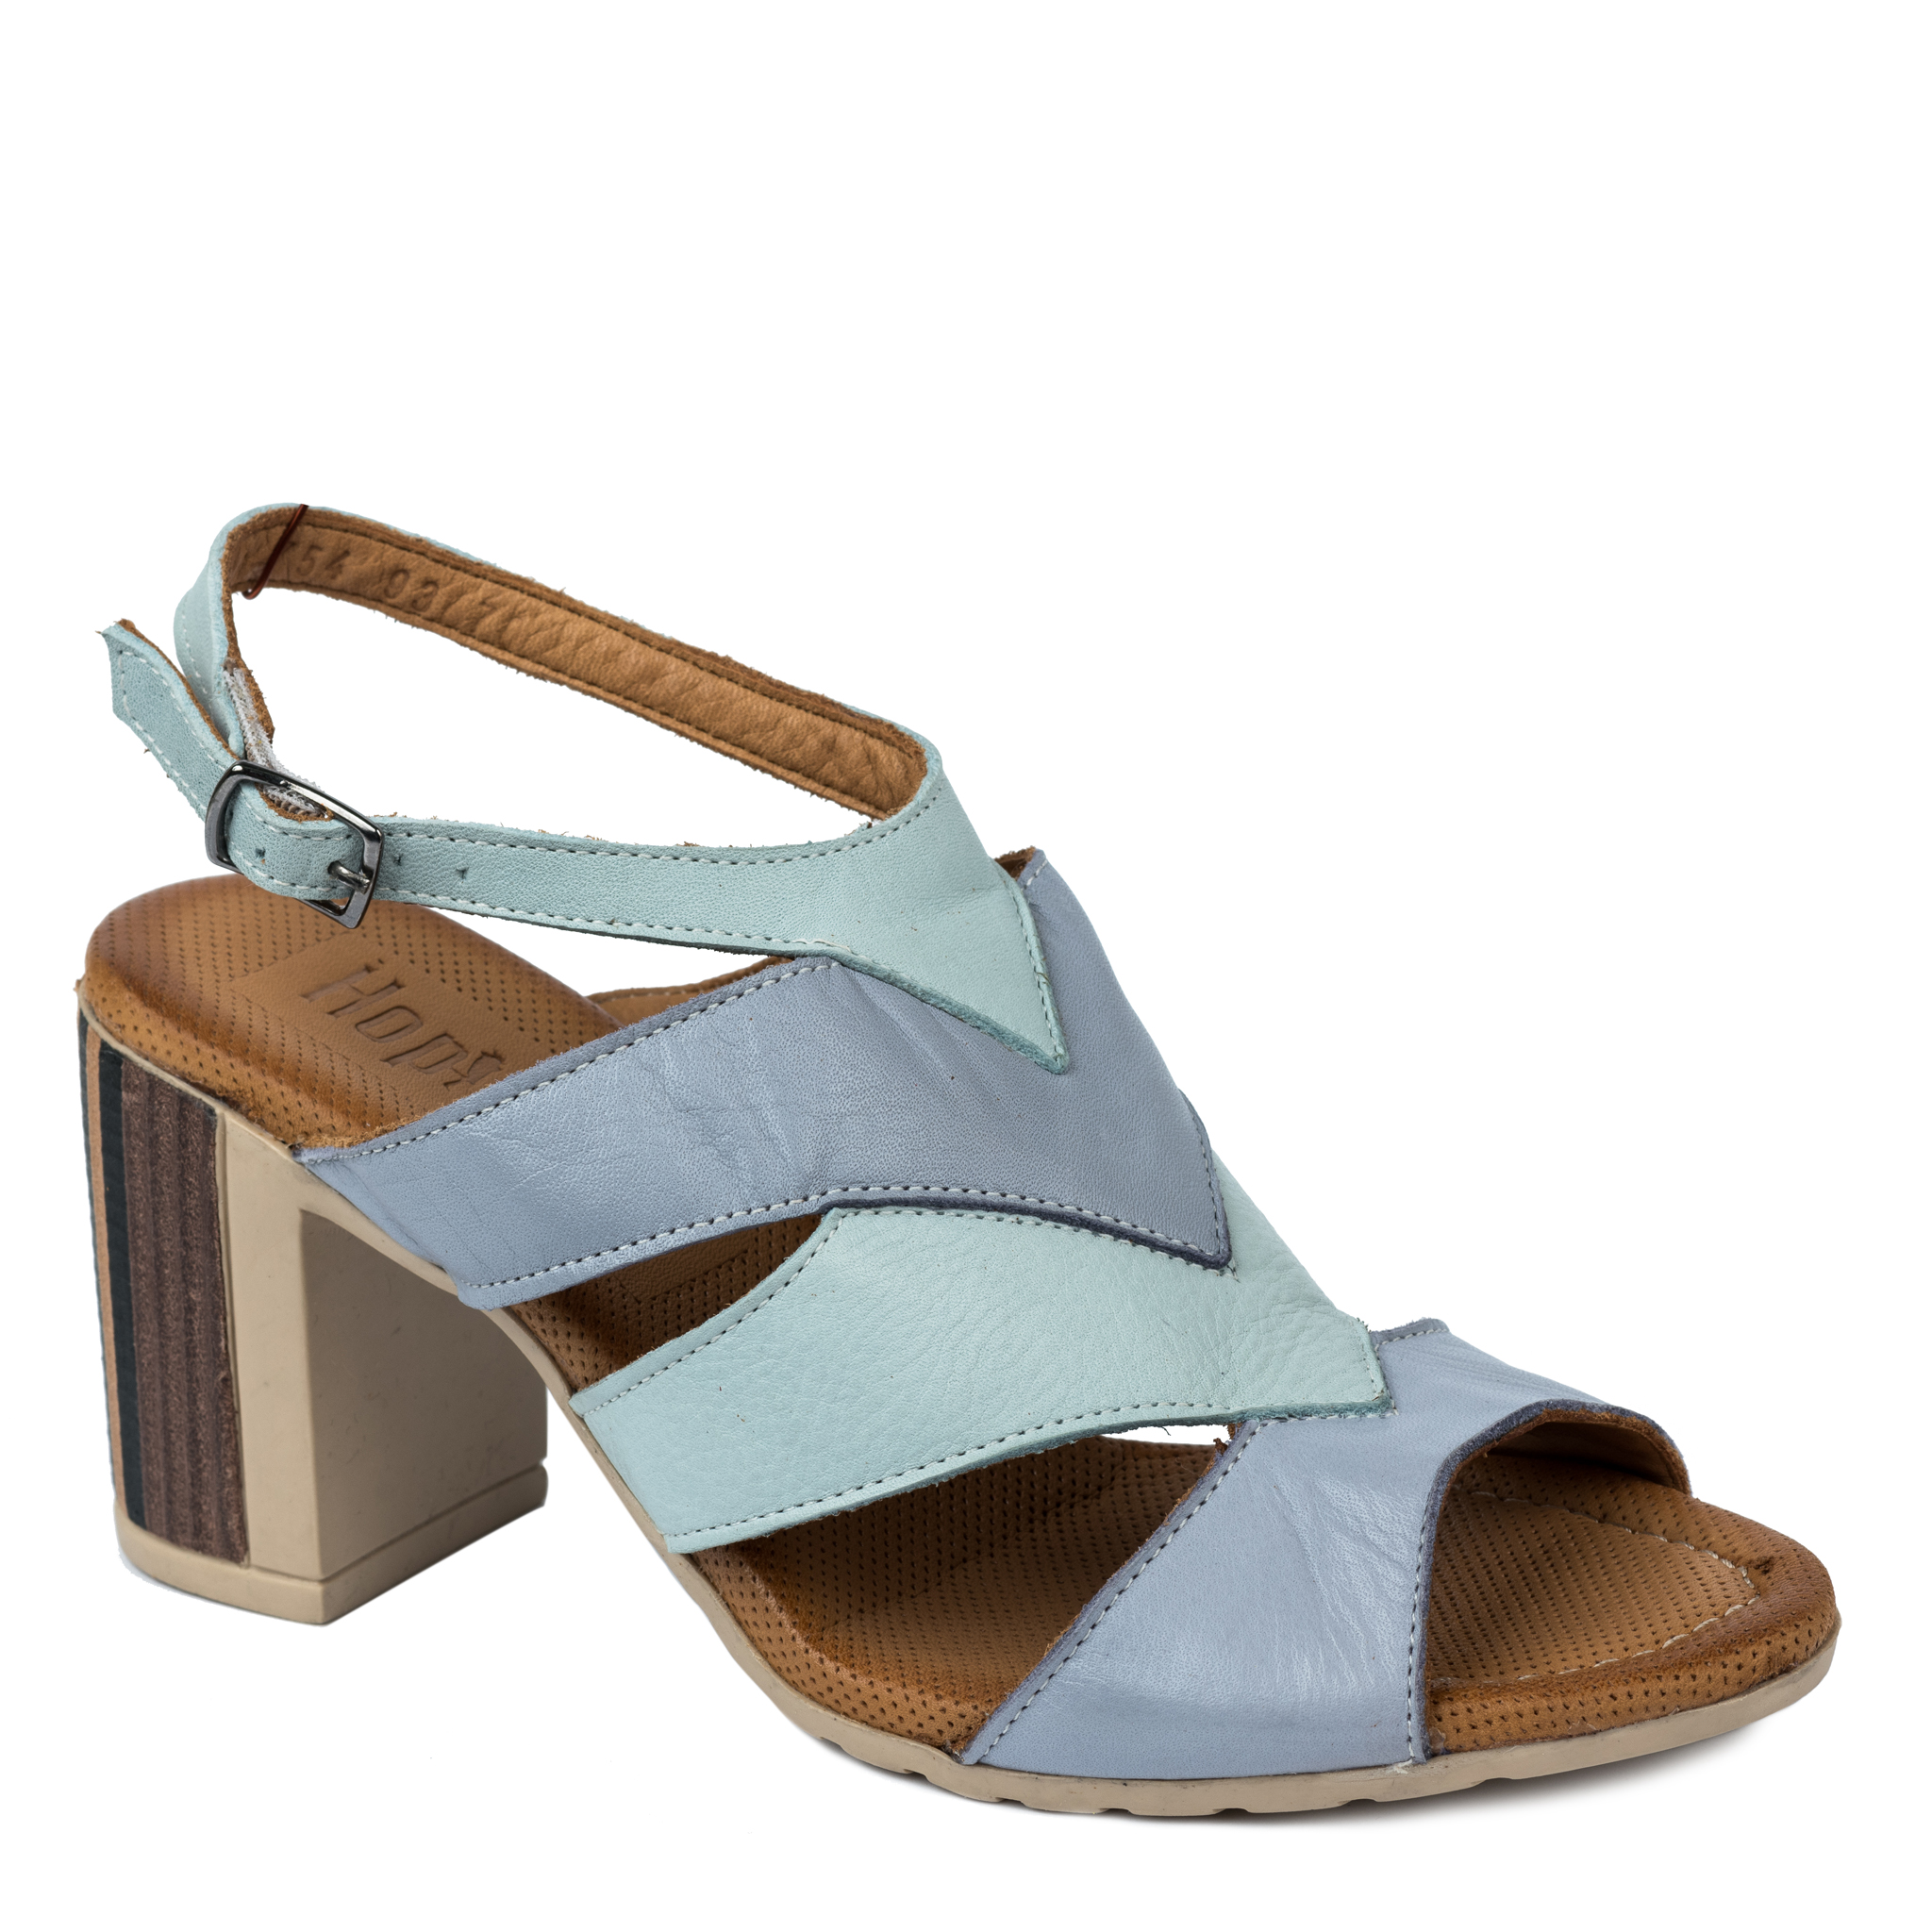 Leather sandals A787 - BLUE